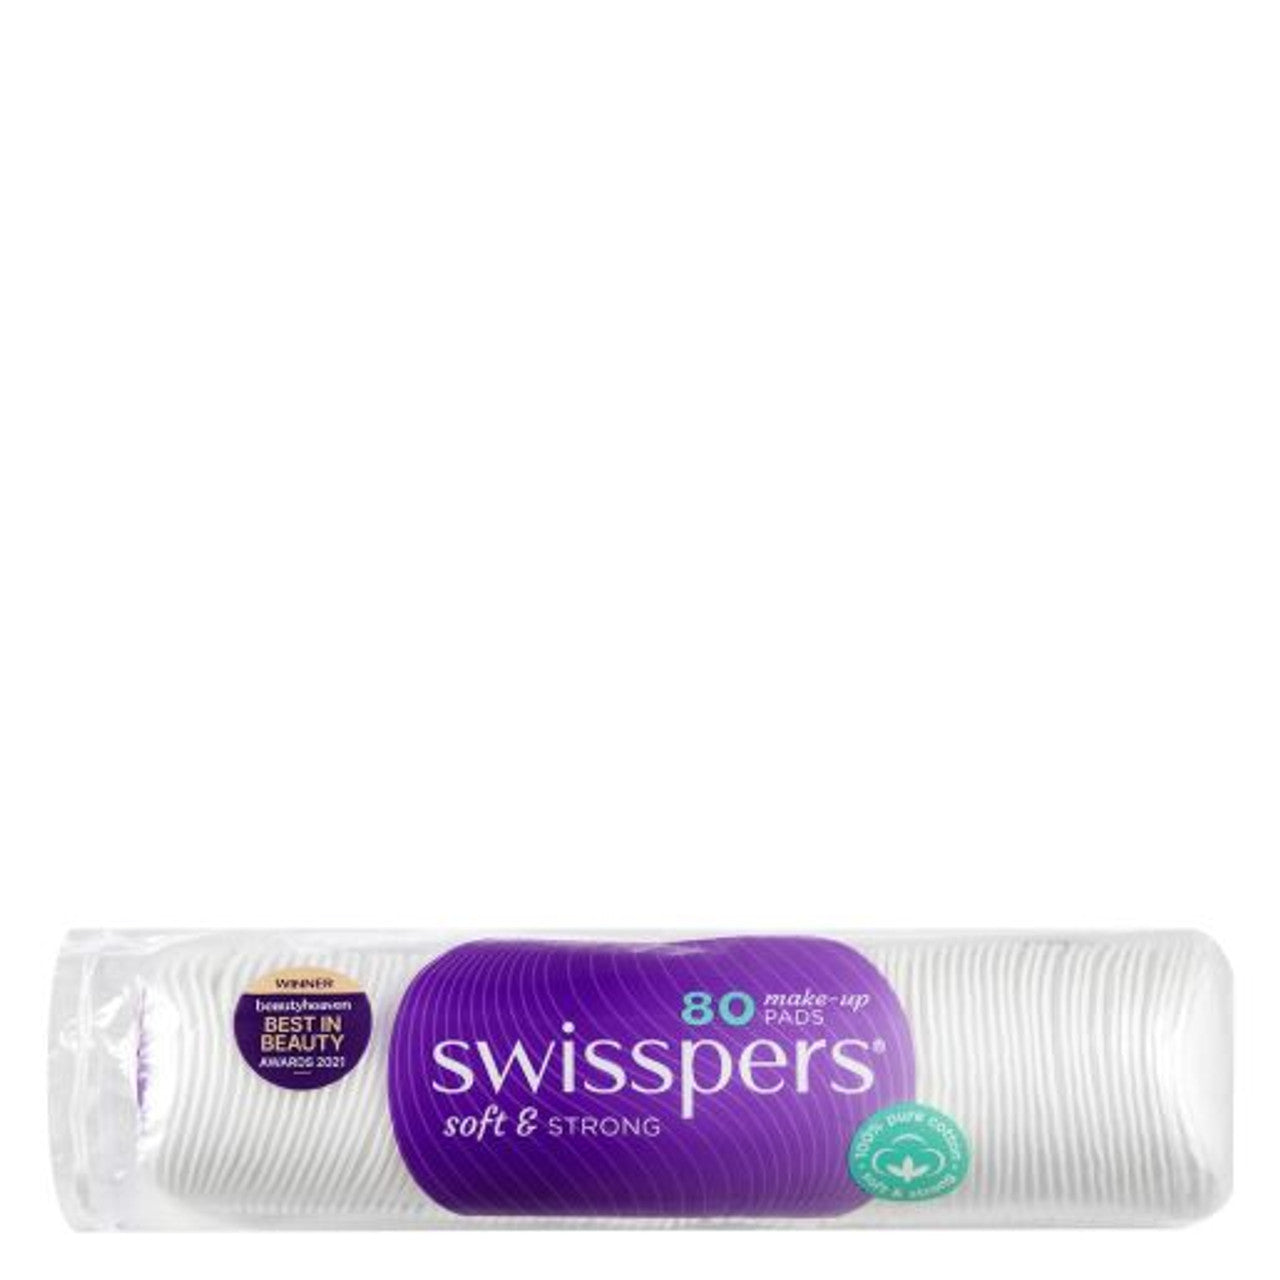 Swisspers Make Up Pads Rounds 80'S